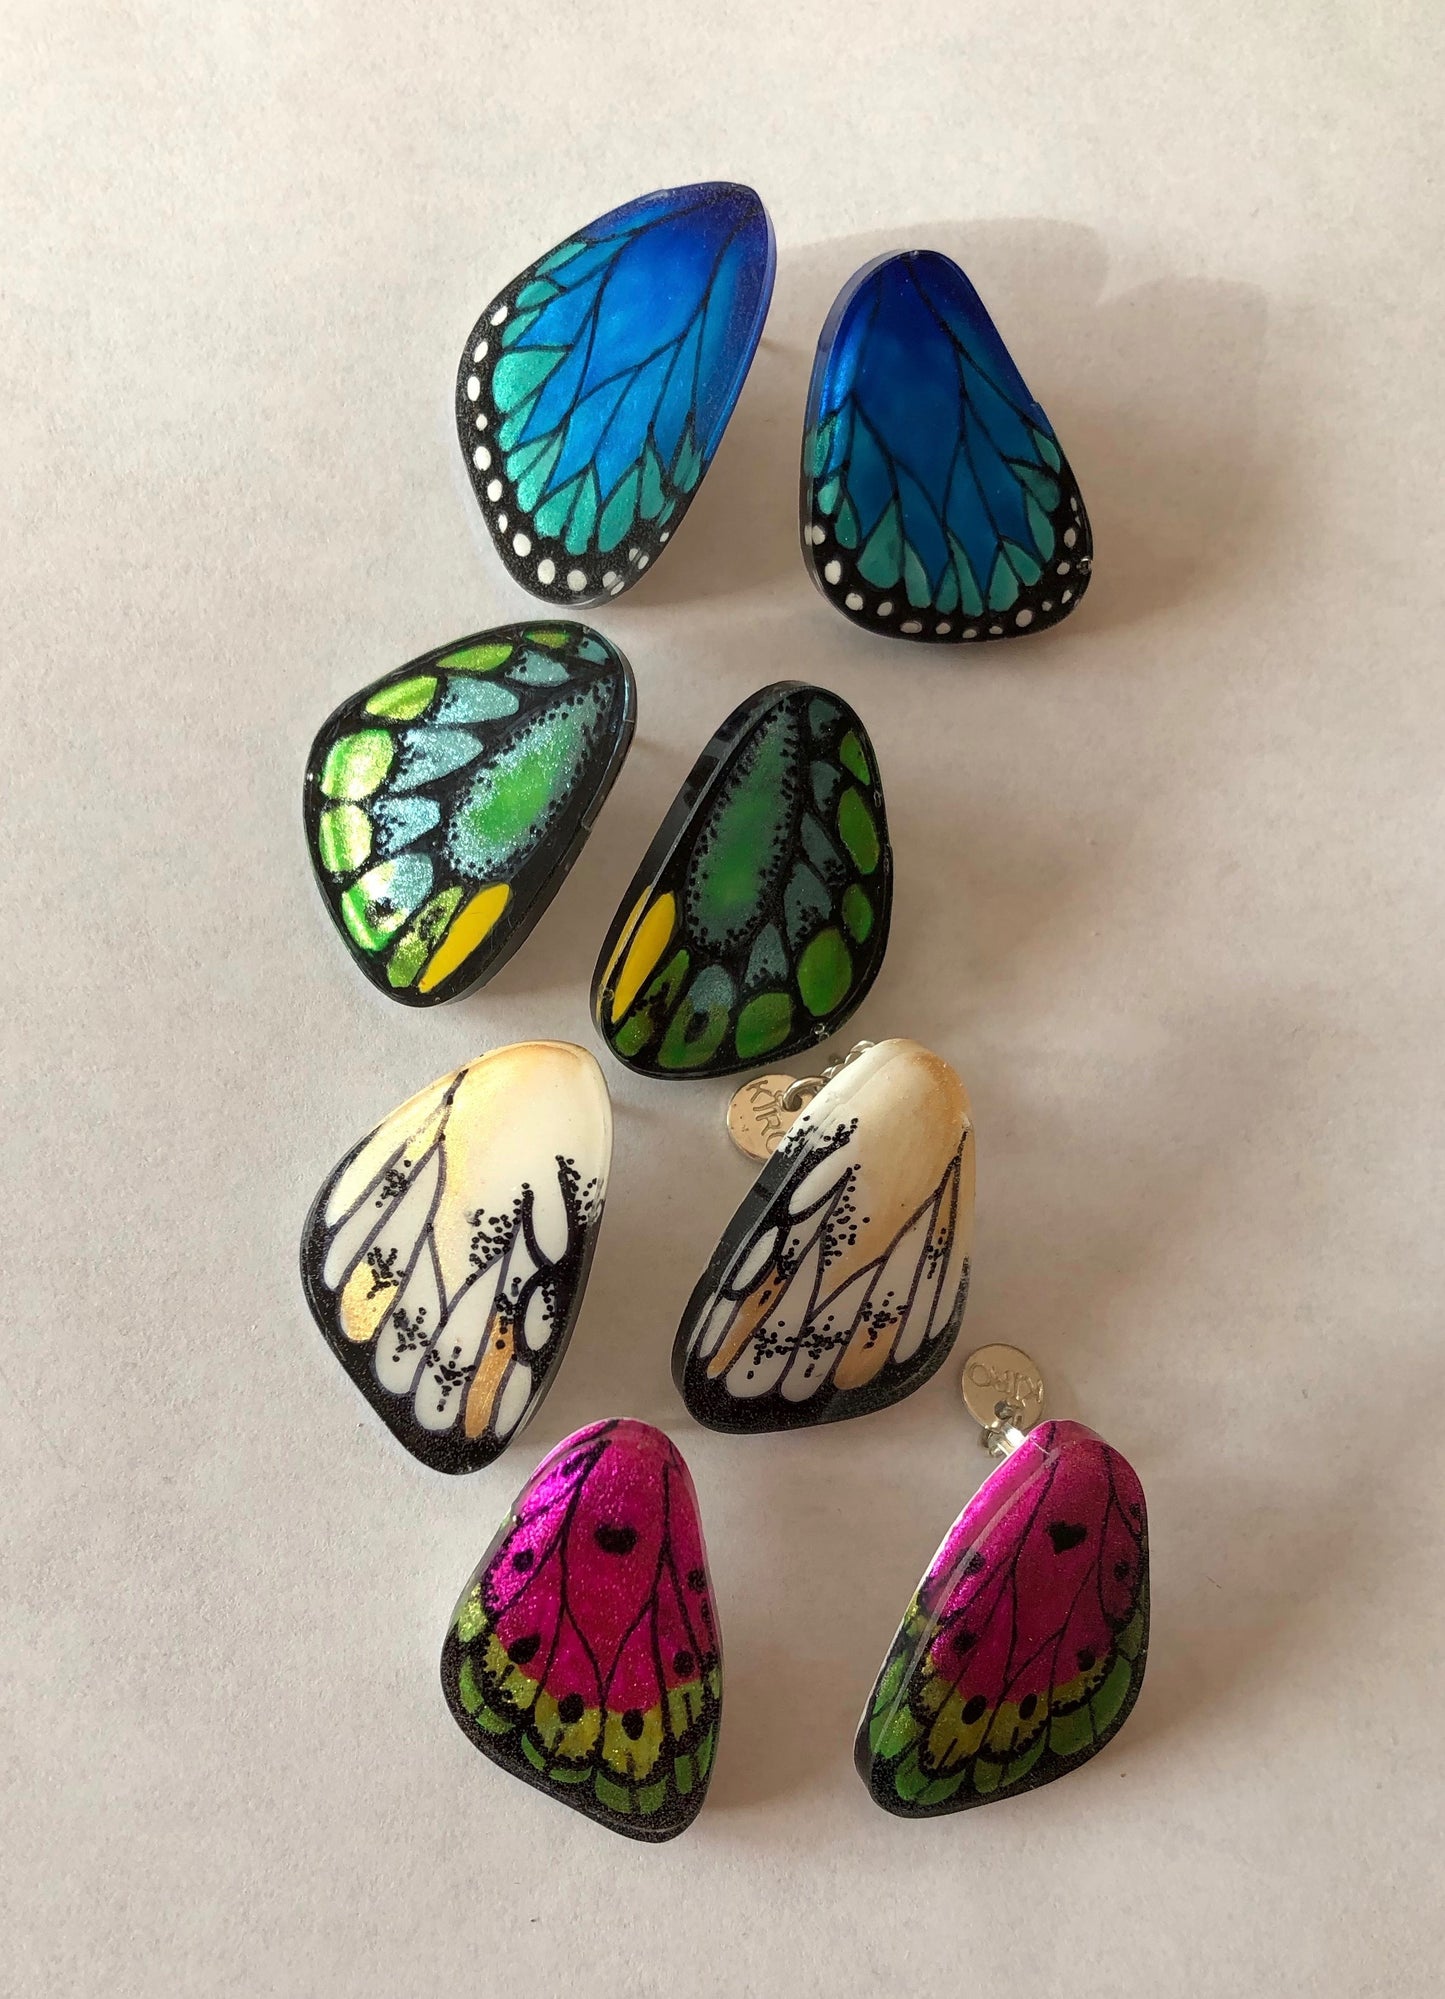 Handpainted Butterfly Earrings - Fuchsia Pink and Green - MIni